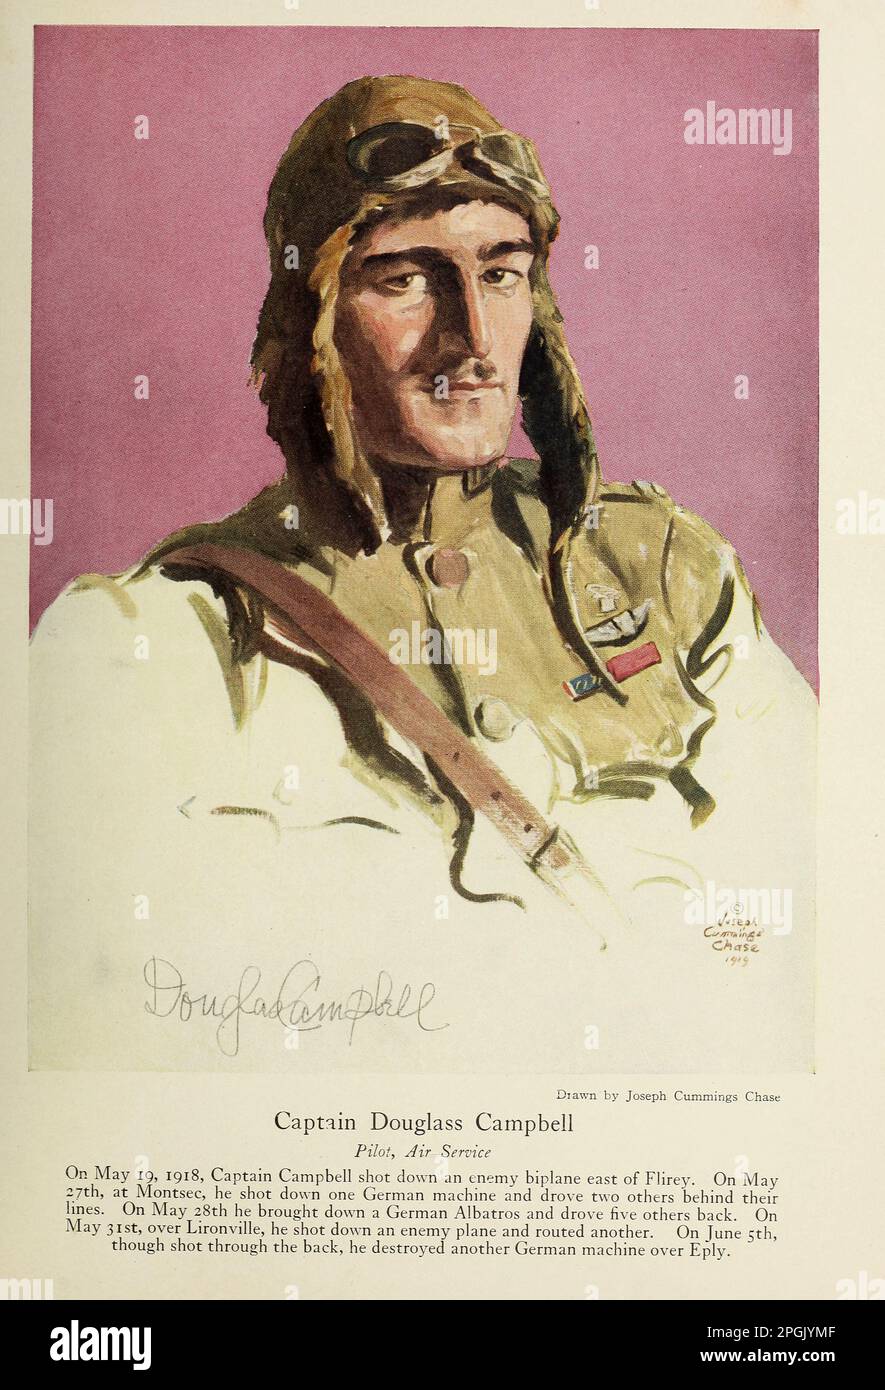 Captain Douglass Campbell Pilot, Air Service On May 19 1918 Campbell shot down an enemy biplane east of Flitey. On May 27th at Montasec he shot down one German machine and drove two others behind their lines  from the book ' Deeds of heroism and bravery : the book of heroes and personal daring ' by Elwyn Alfred Barron and Rupert Hughes,  Publication Date 1920 Publisher New York : Harper & Brothers Publishers Stock Photo